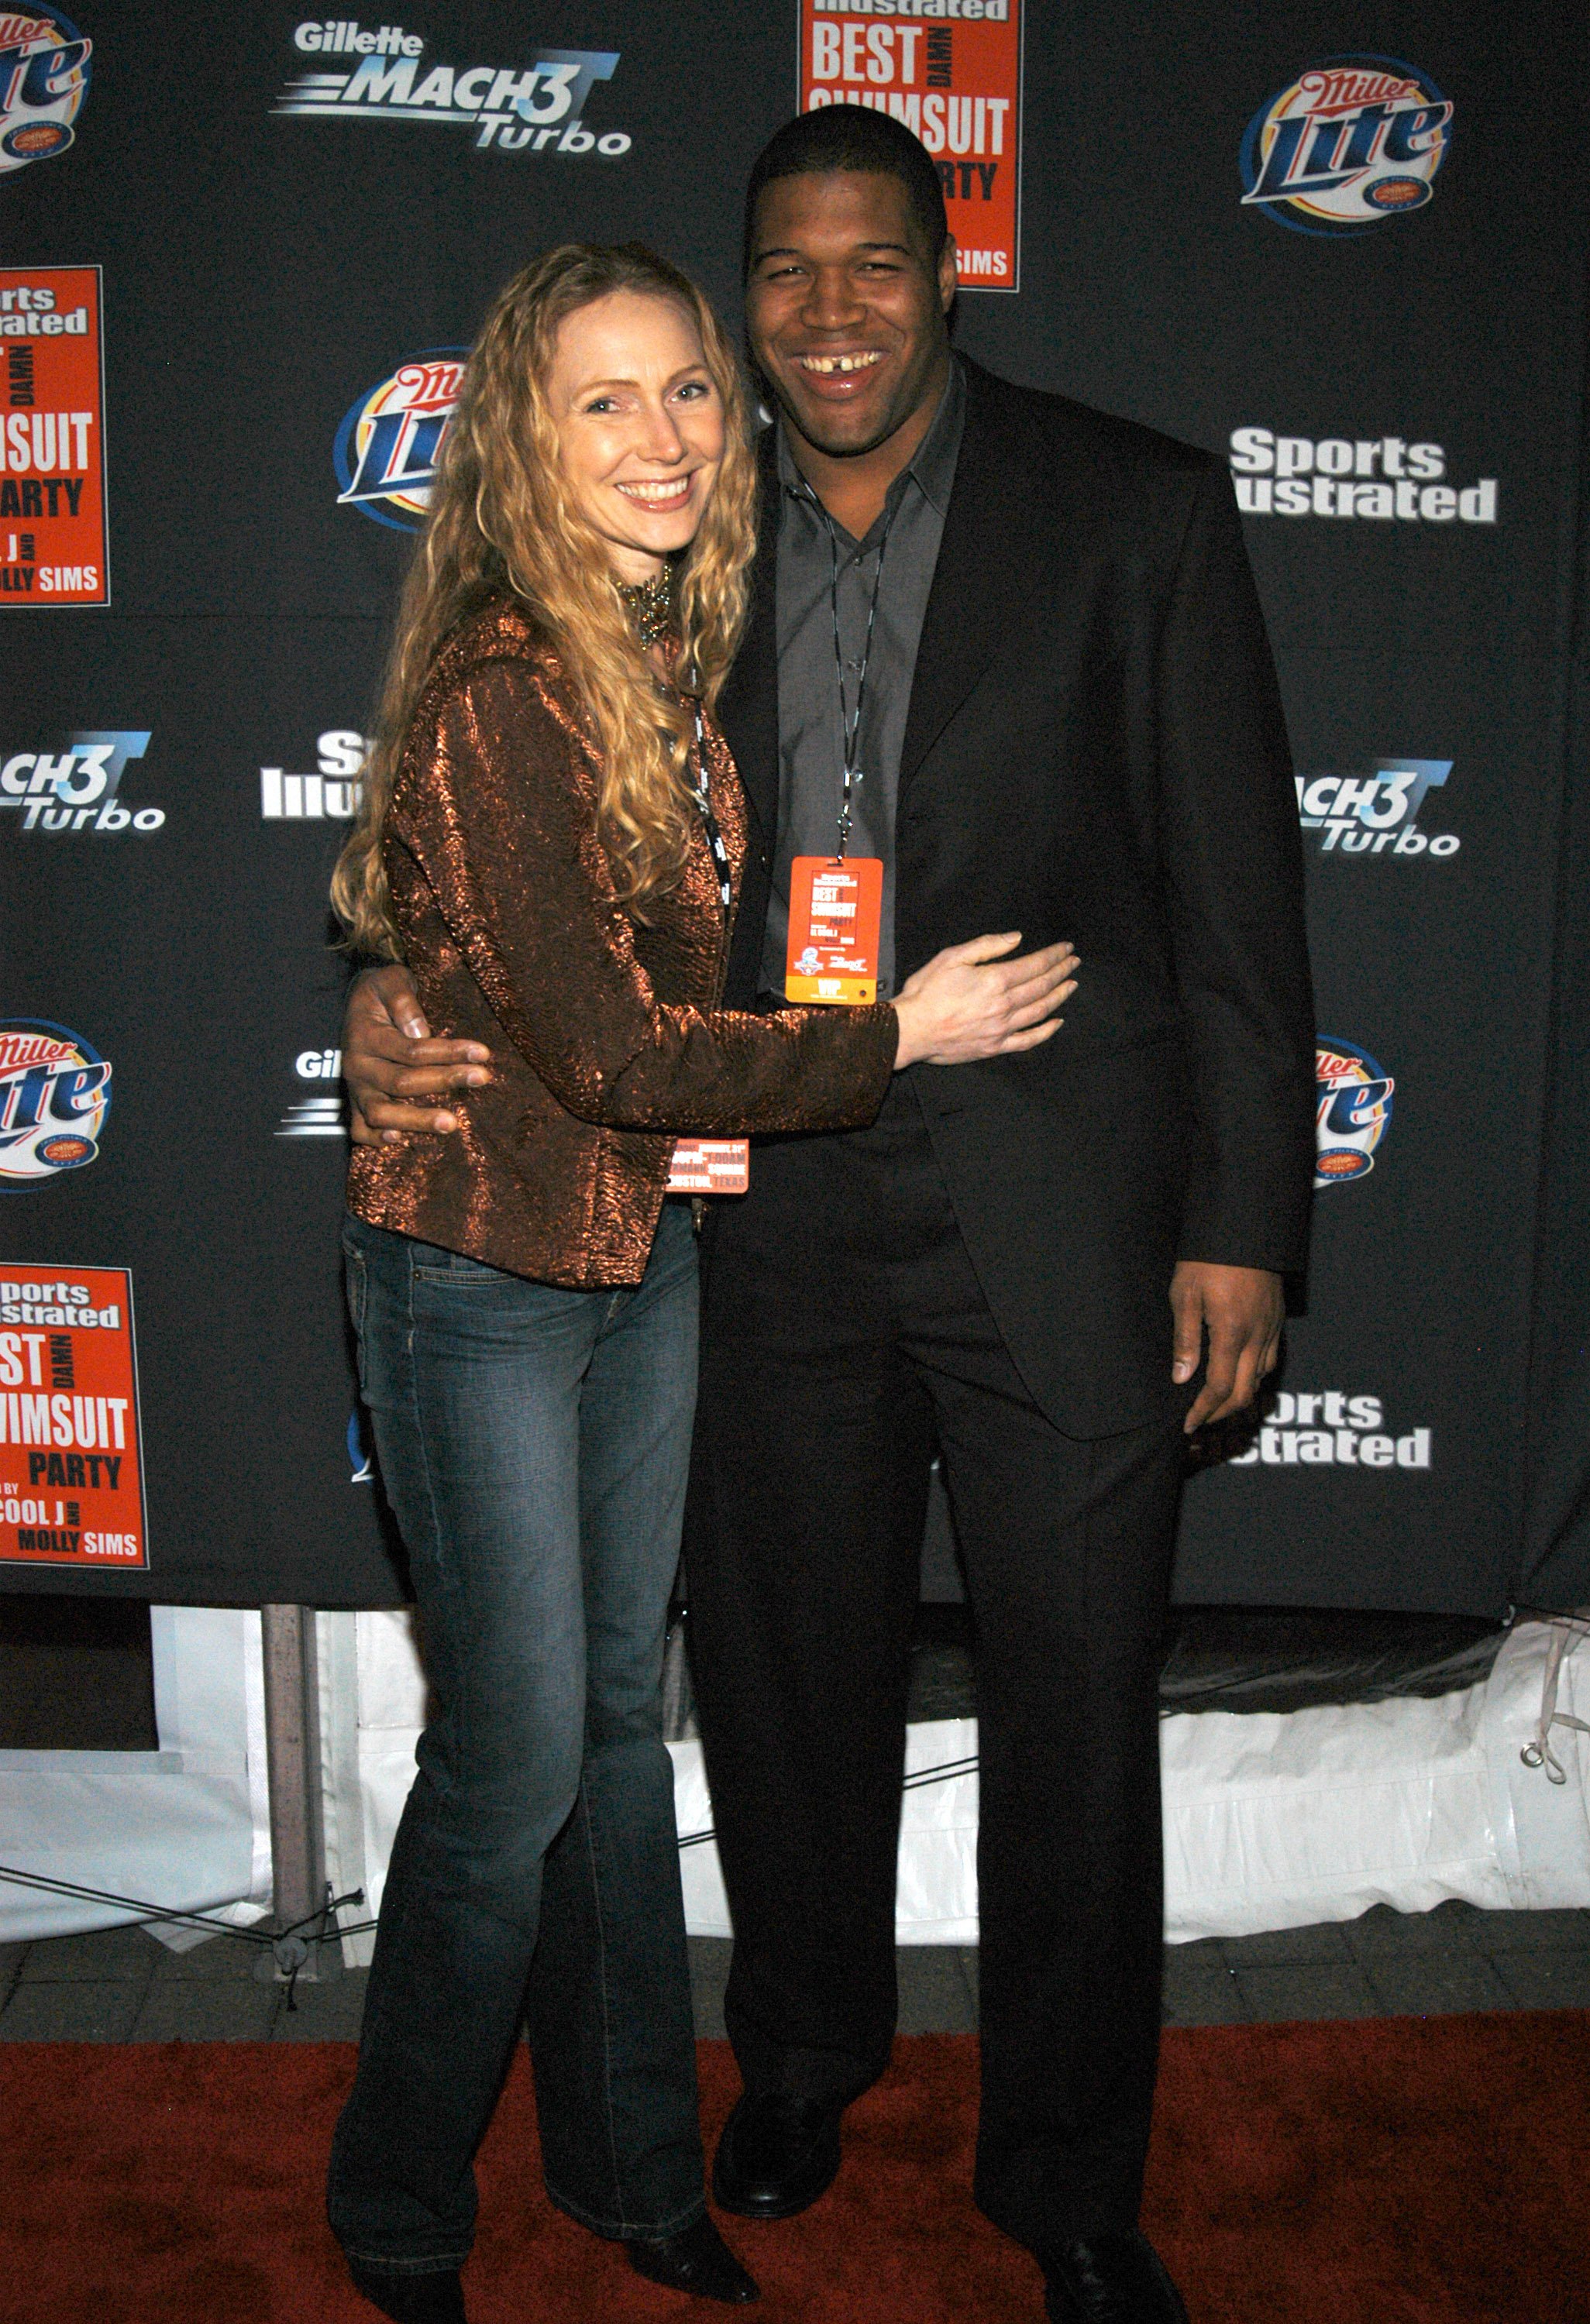 Jean and Michael Strahan at the SuperBowl XXXVIII - Gillette/Sports Illustrated Party on January 31, 2004. | Source: Jason Nevader/WireImage/Getty Images